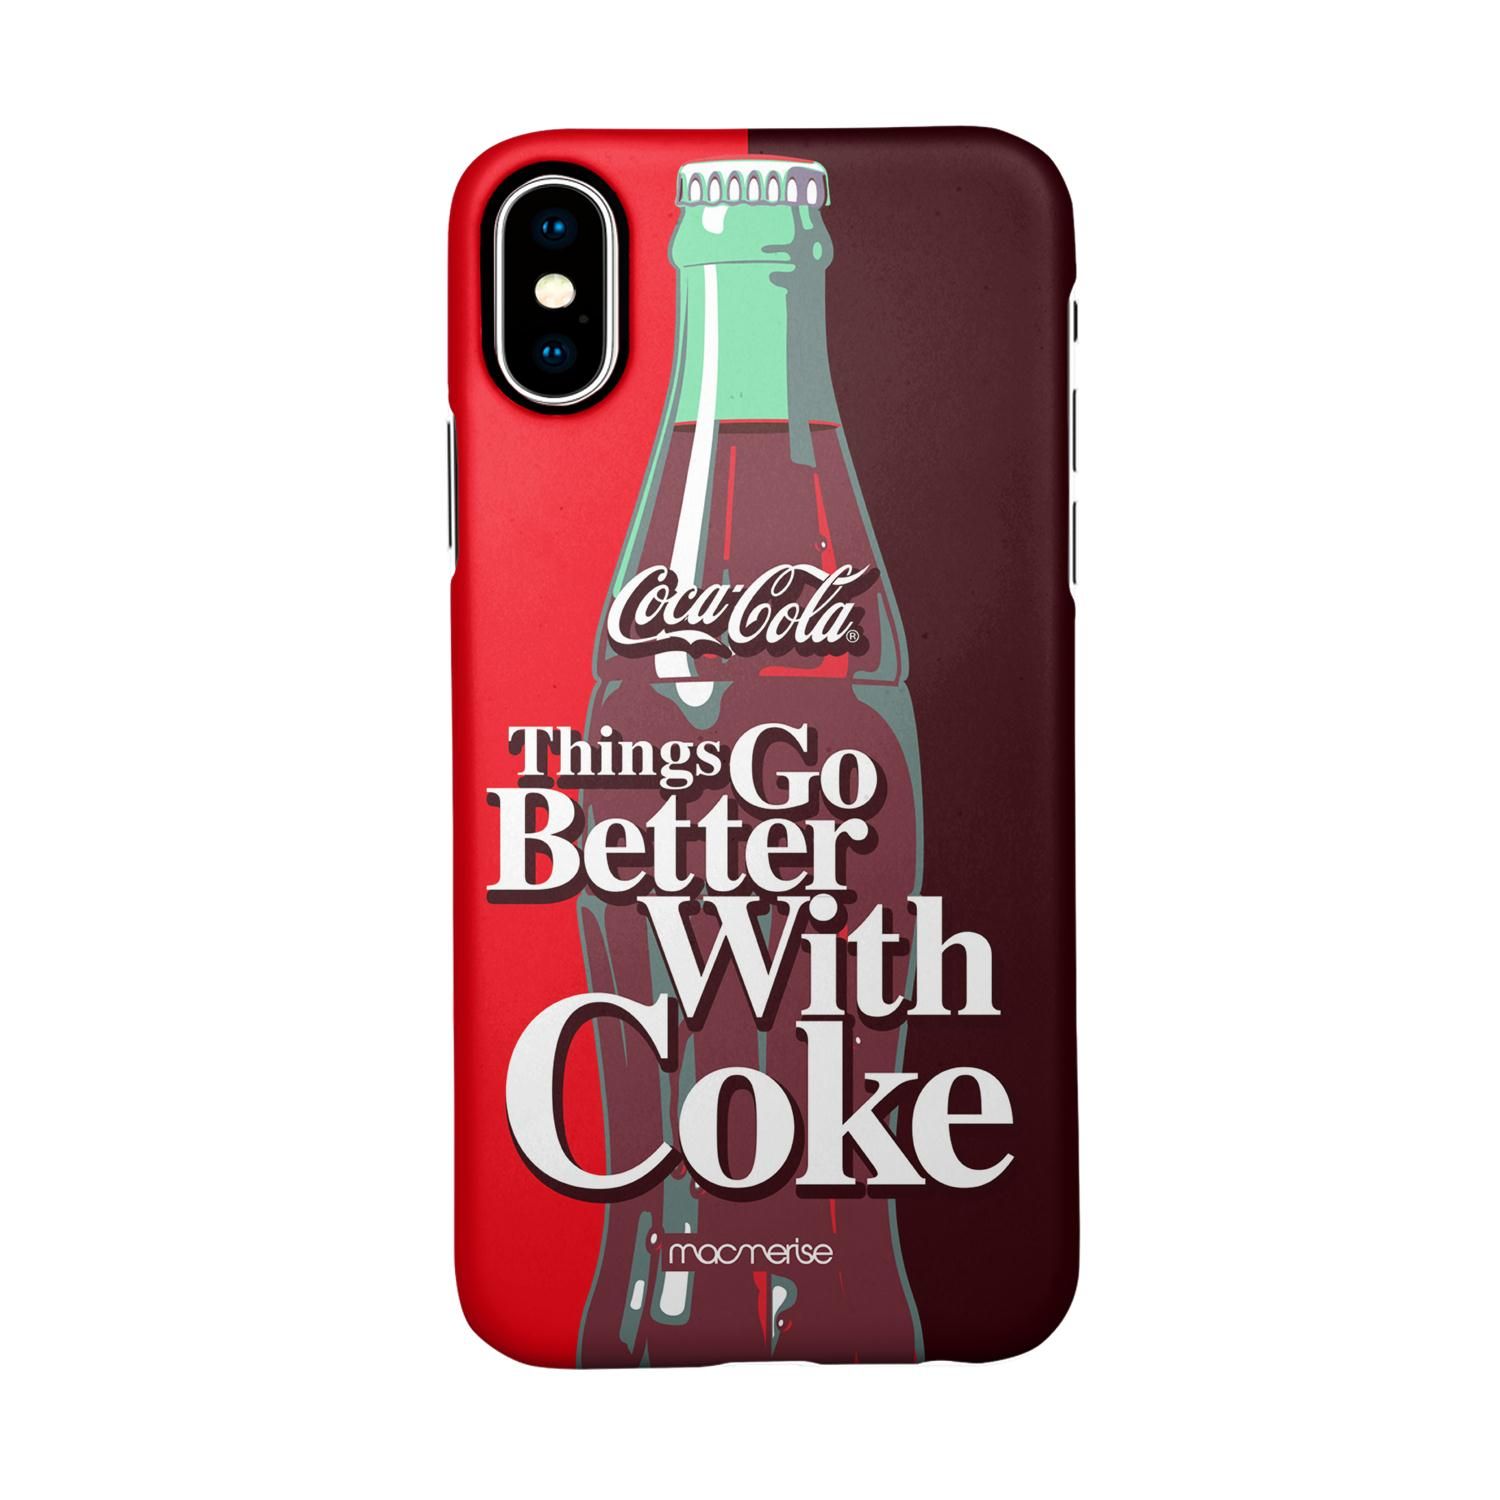 Go With Coke - Sleek Phone Case for iPhone X